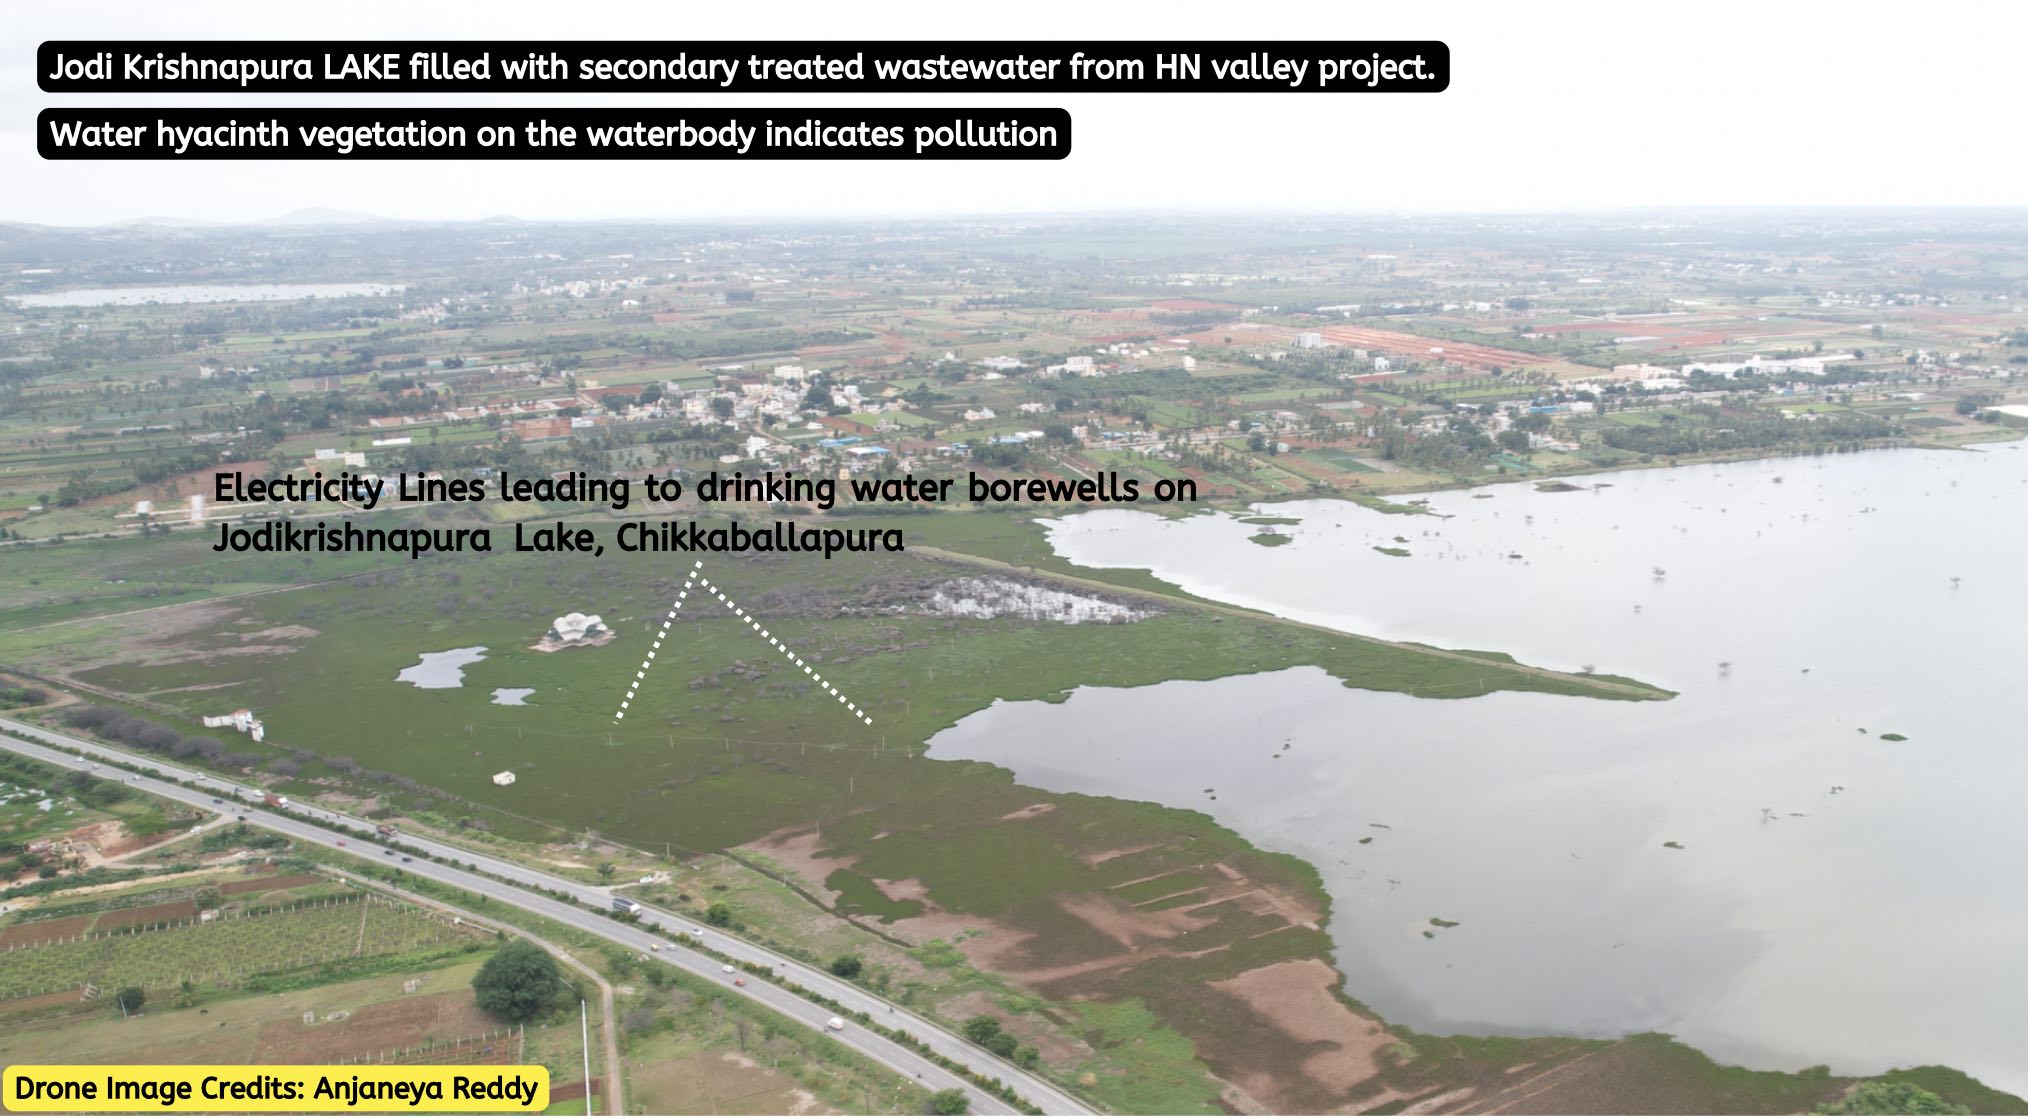 Jodi Krishnapura Lake filled with secondary treated wastewater. Water Hyacinth is observed